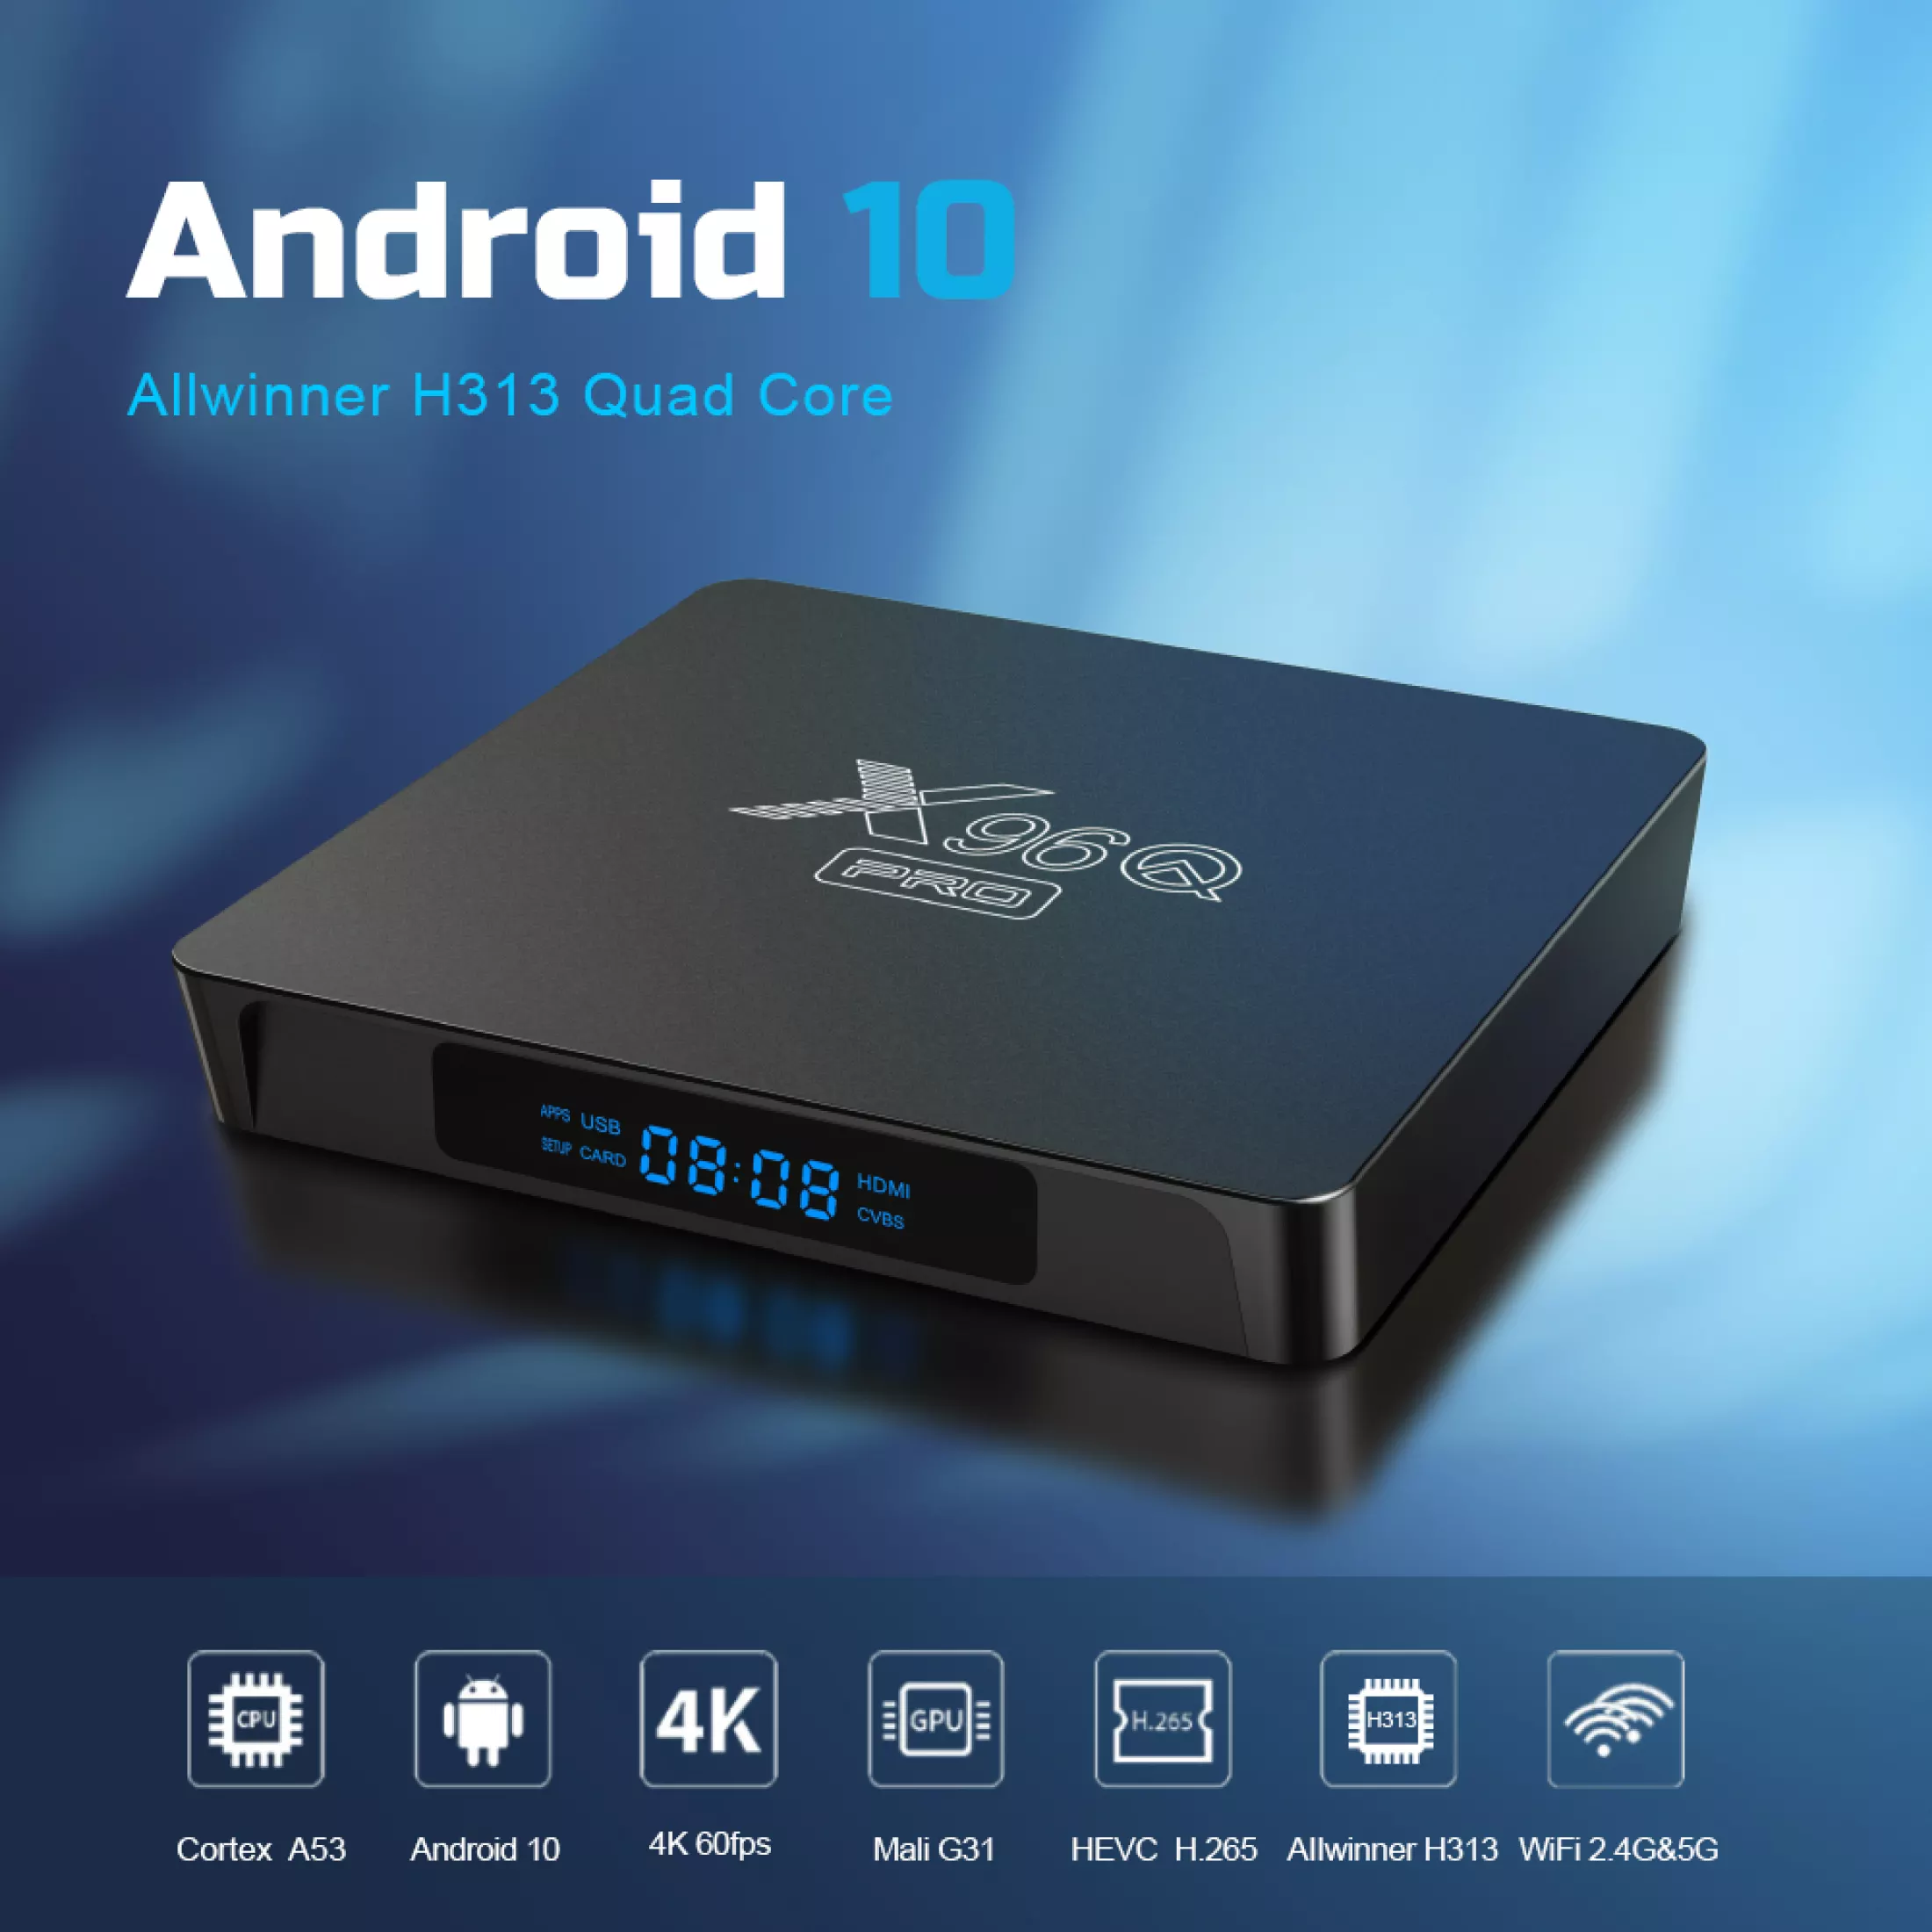 Unboxing Android Tv Box X96Q, Android Tv Box Reviews 2021